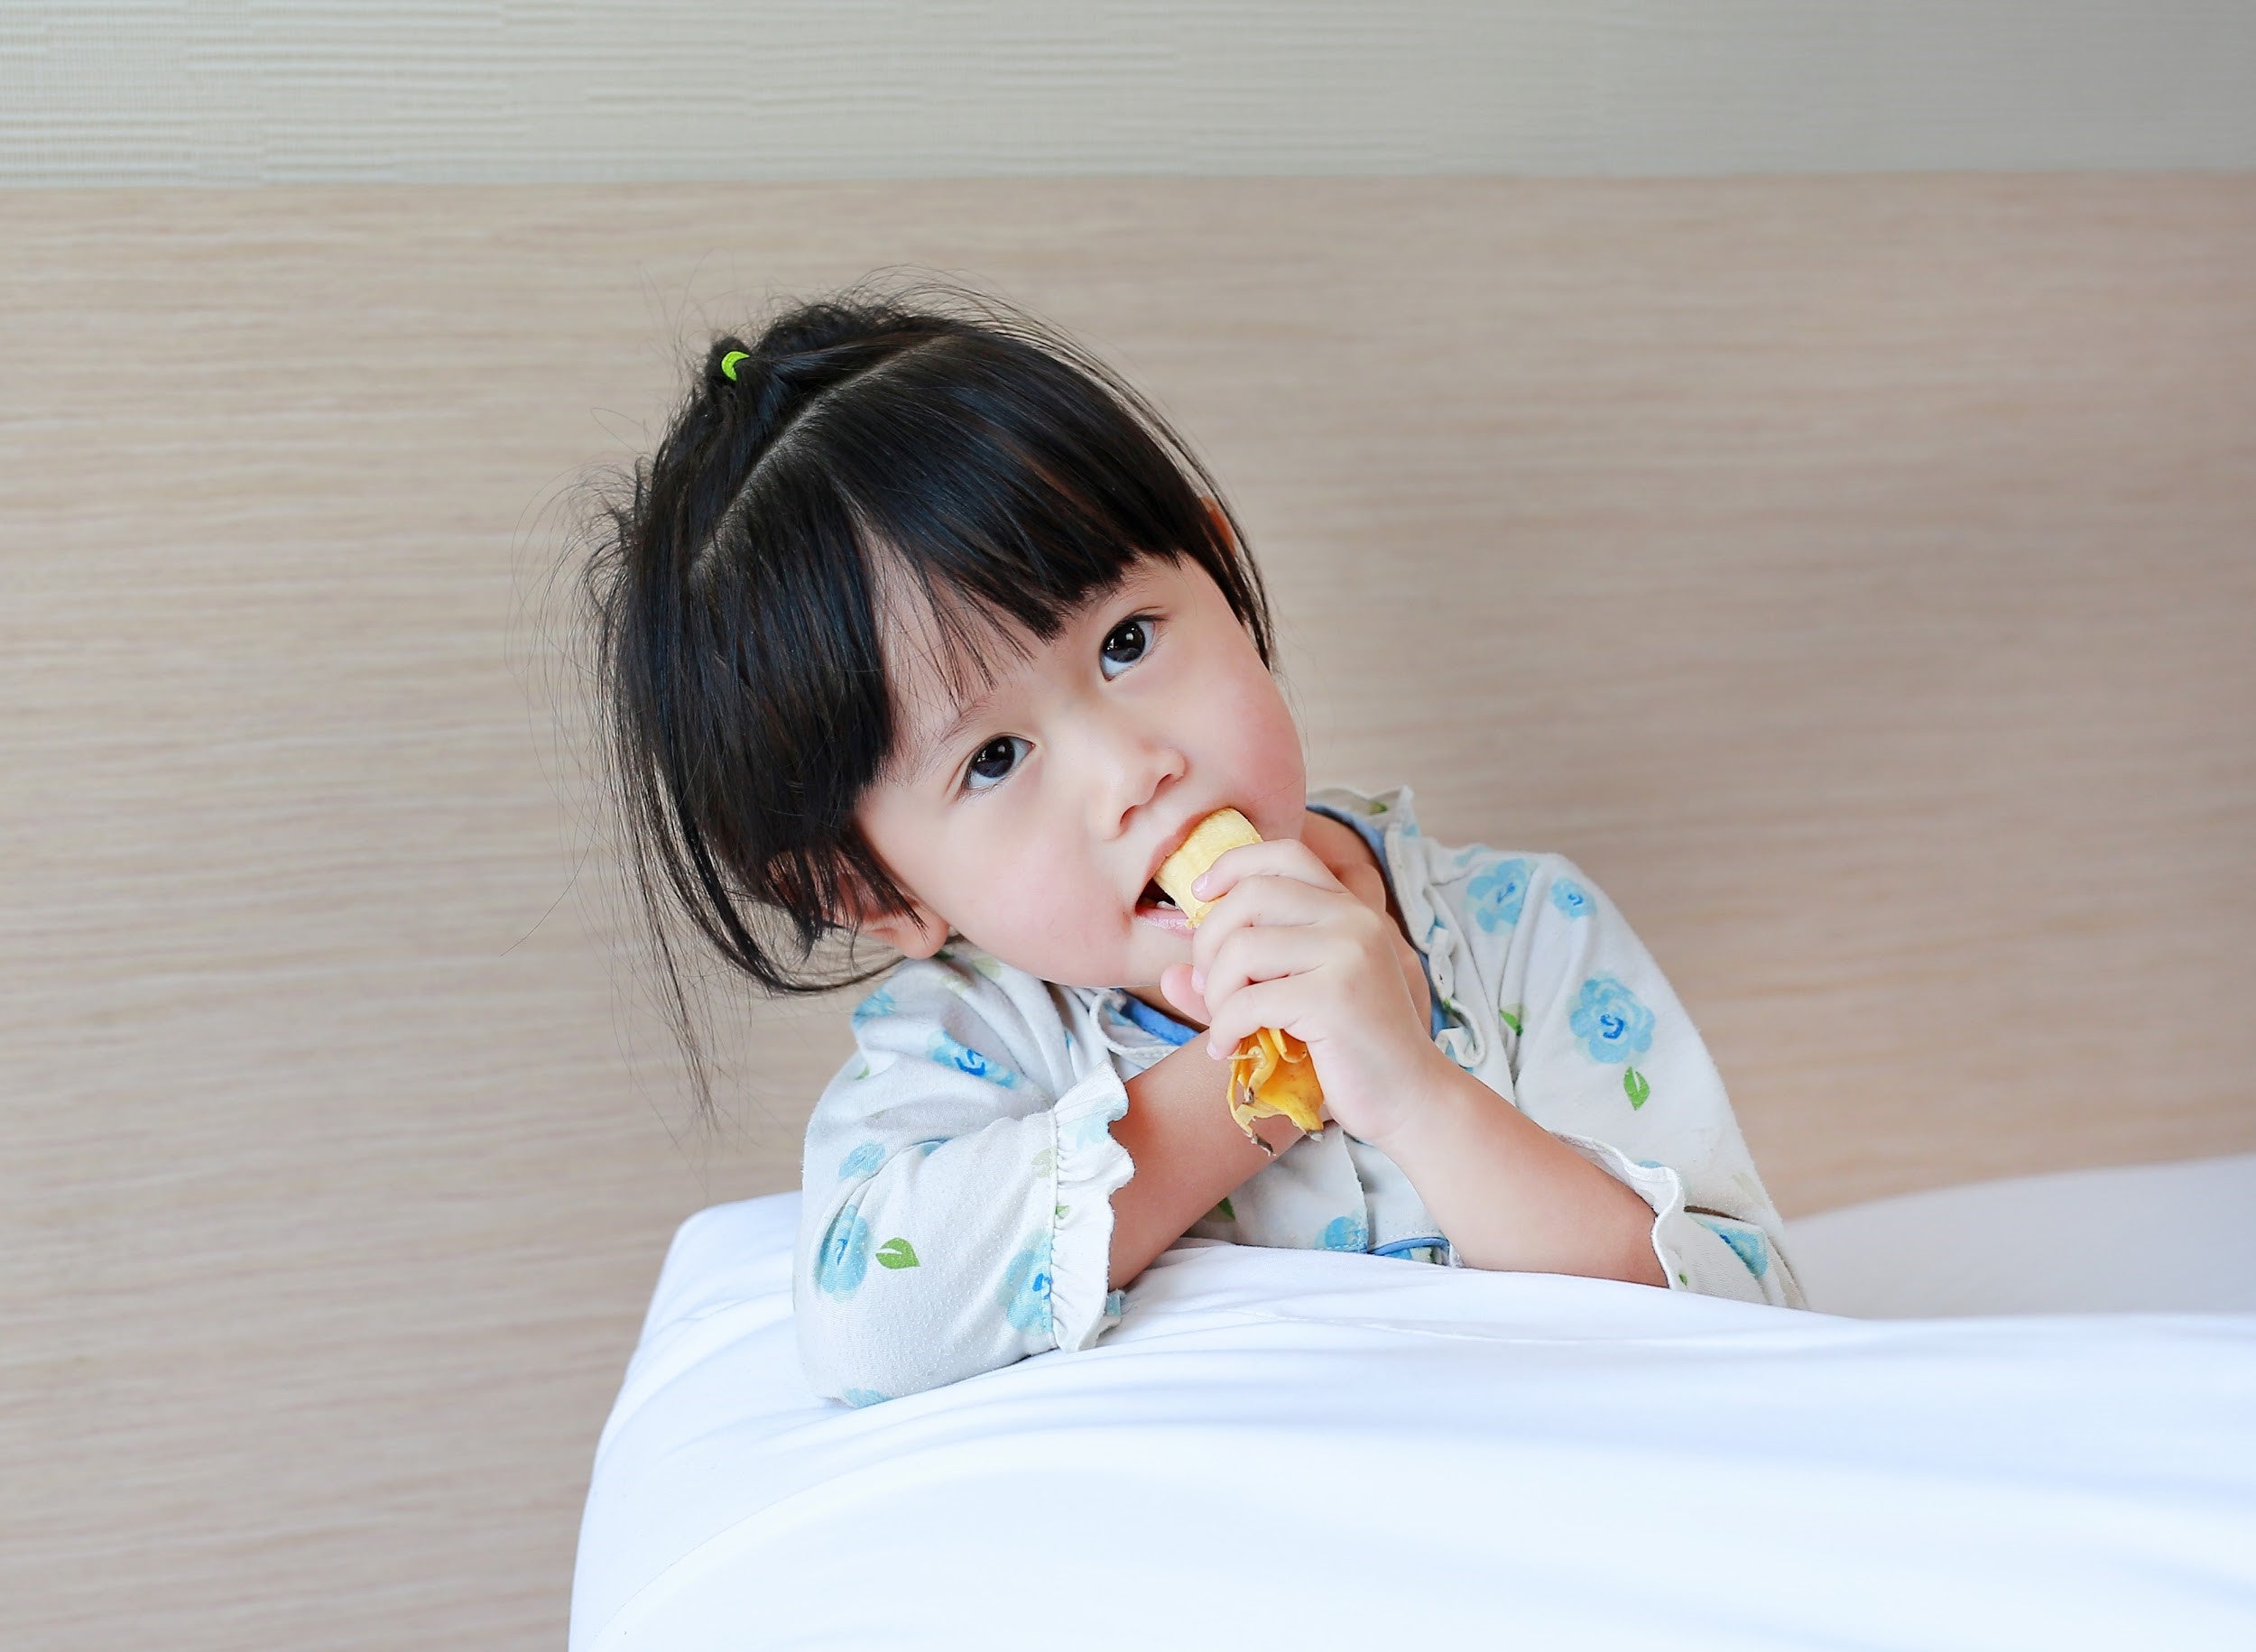 best foods for sick kids by illness - bananas for constipation